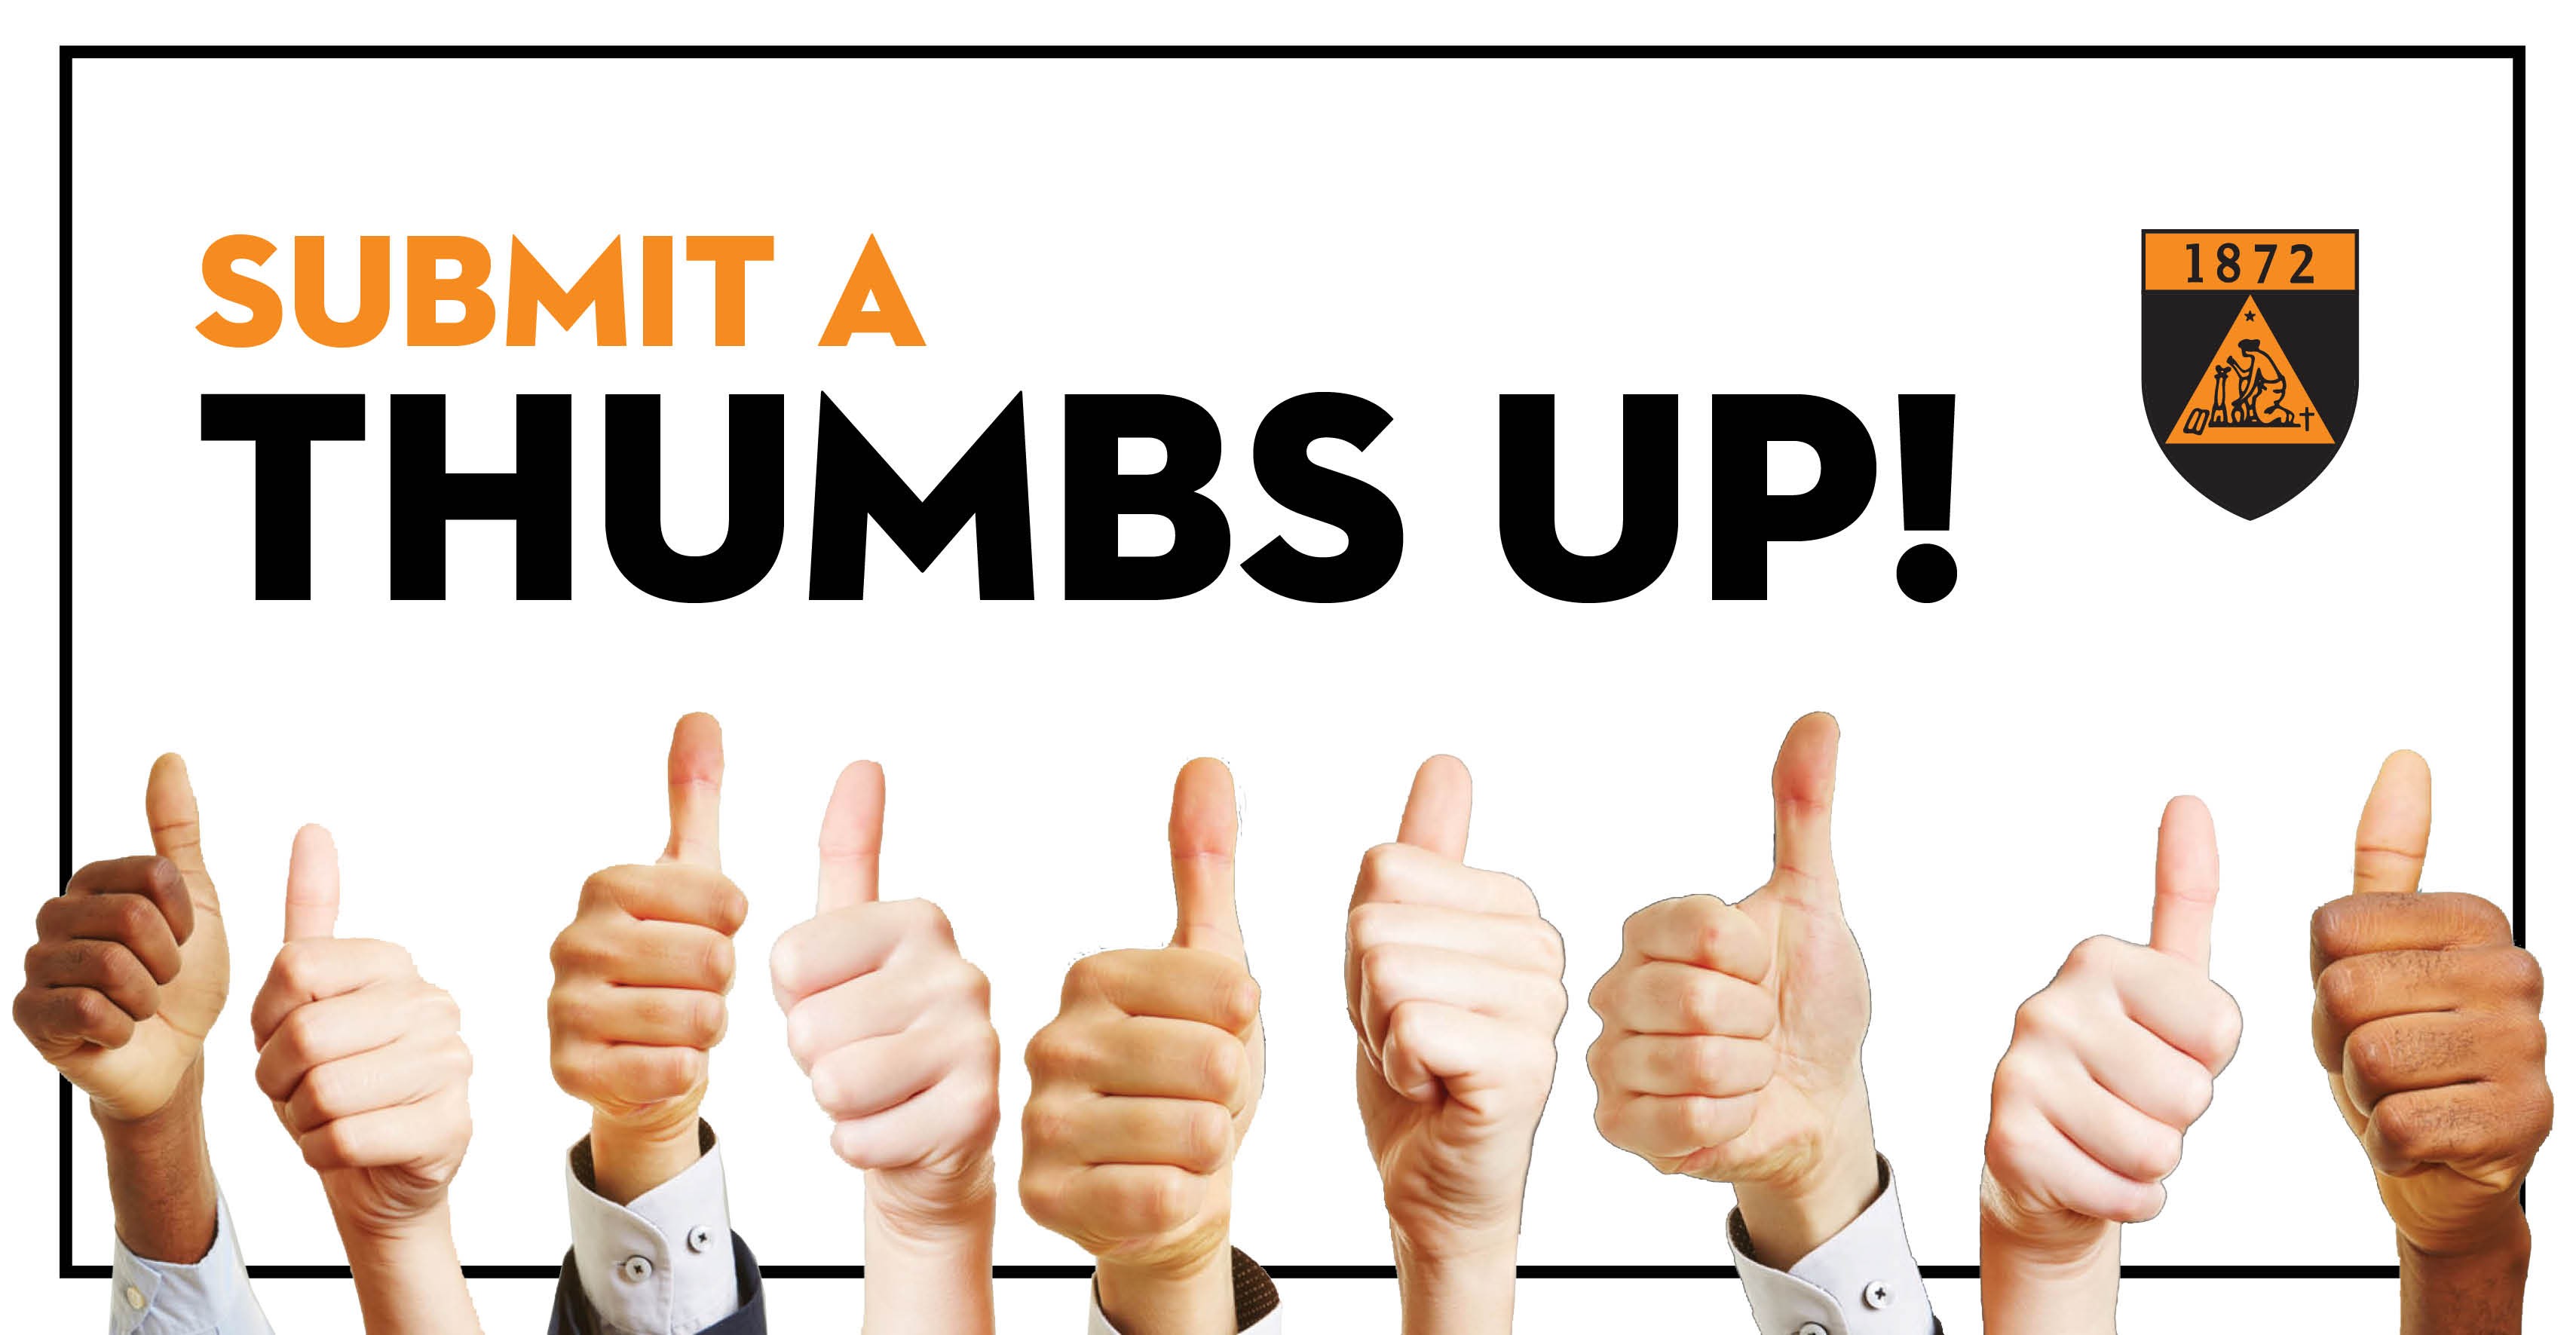 Submit a Thumbs Up!